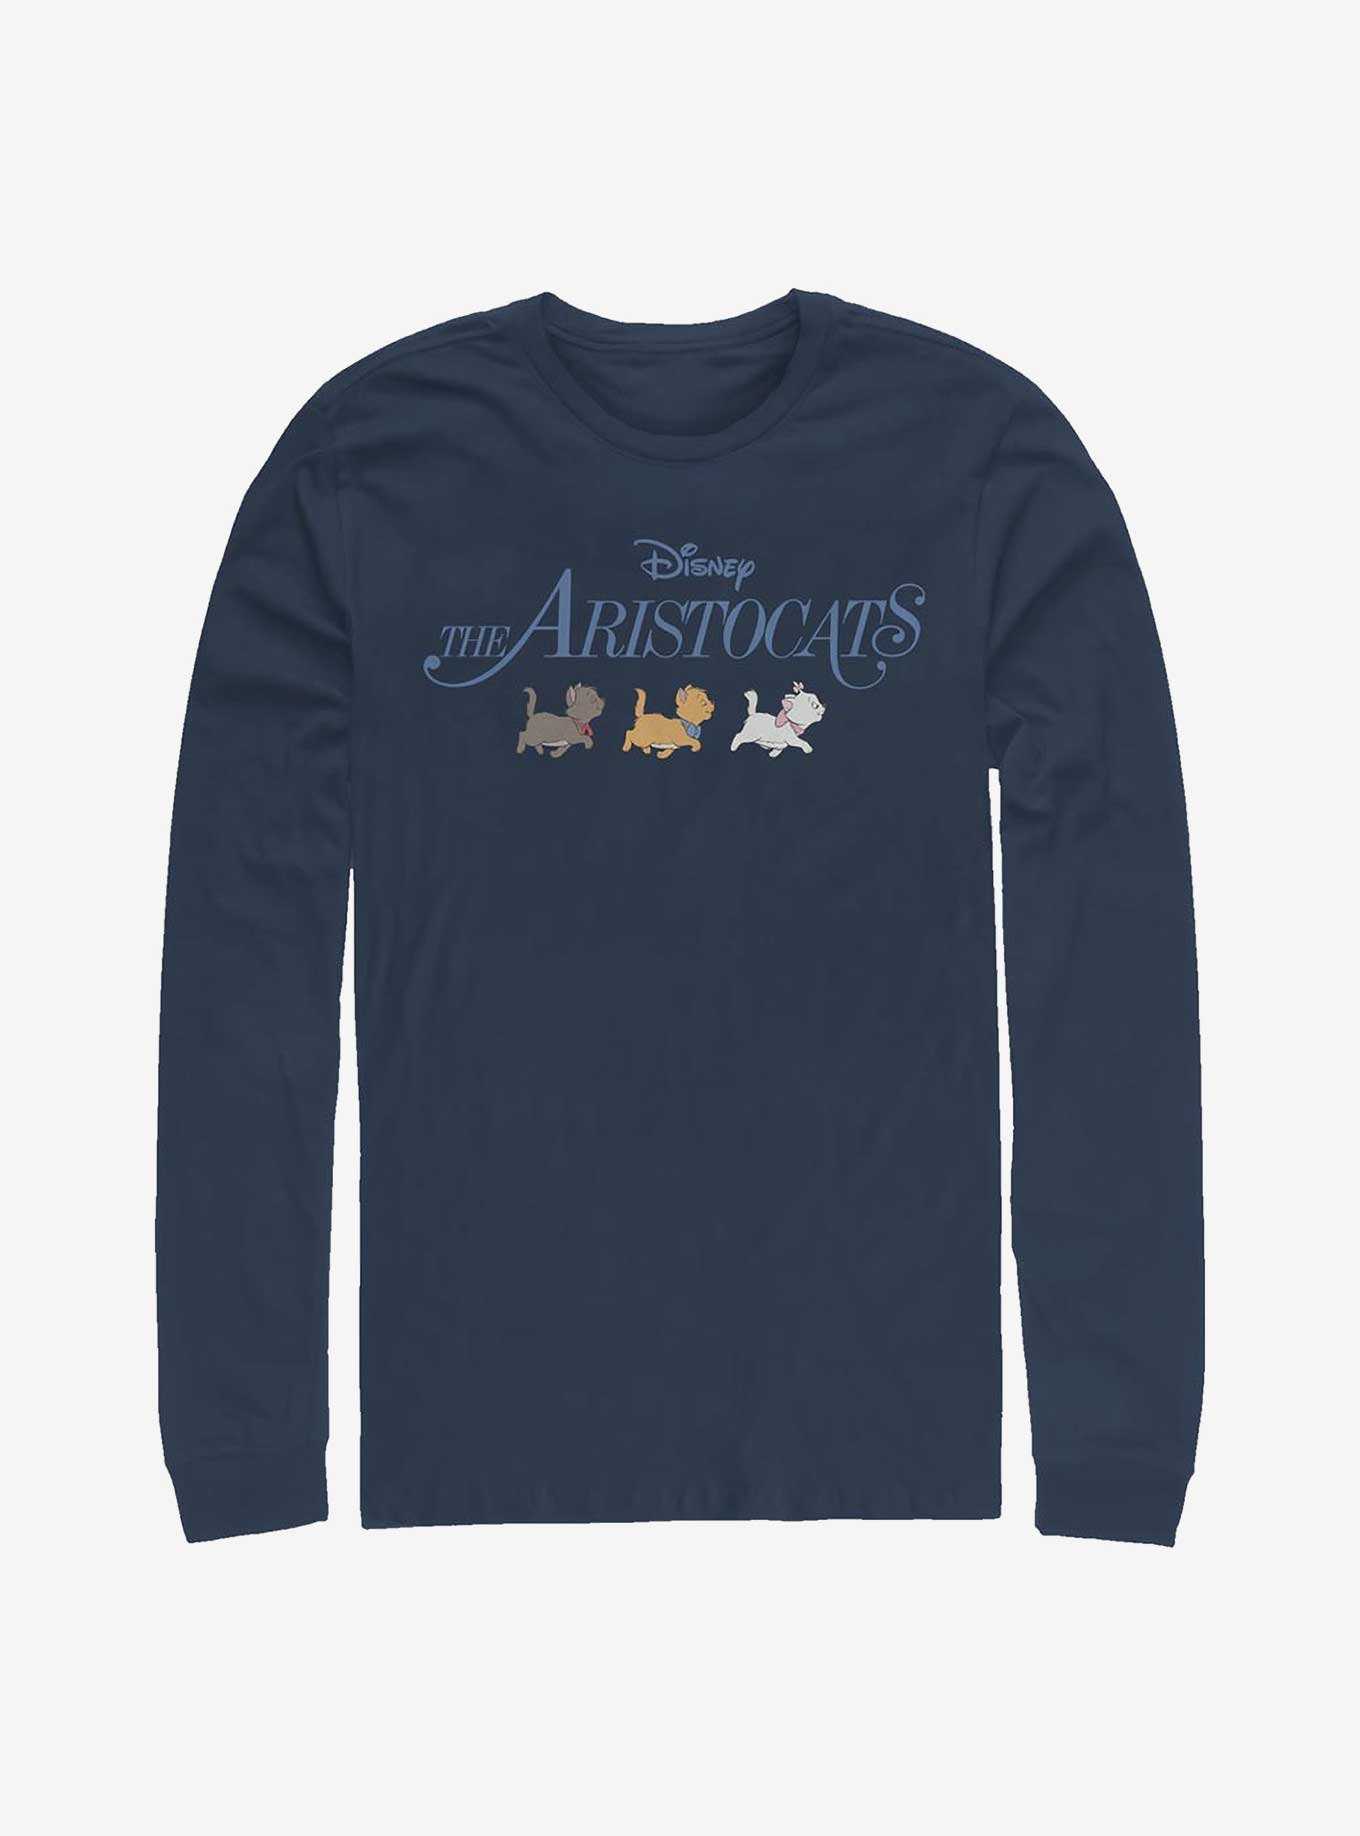 | Shirts, Merchandise Boxlunch Aristocats The Gifts & OFFICIAL